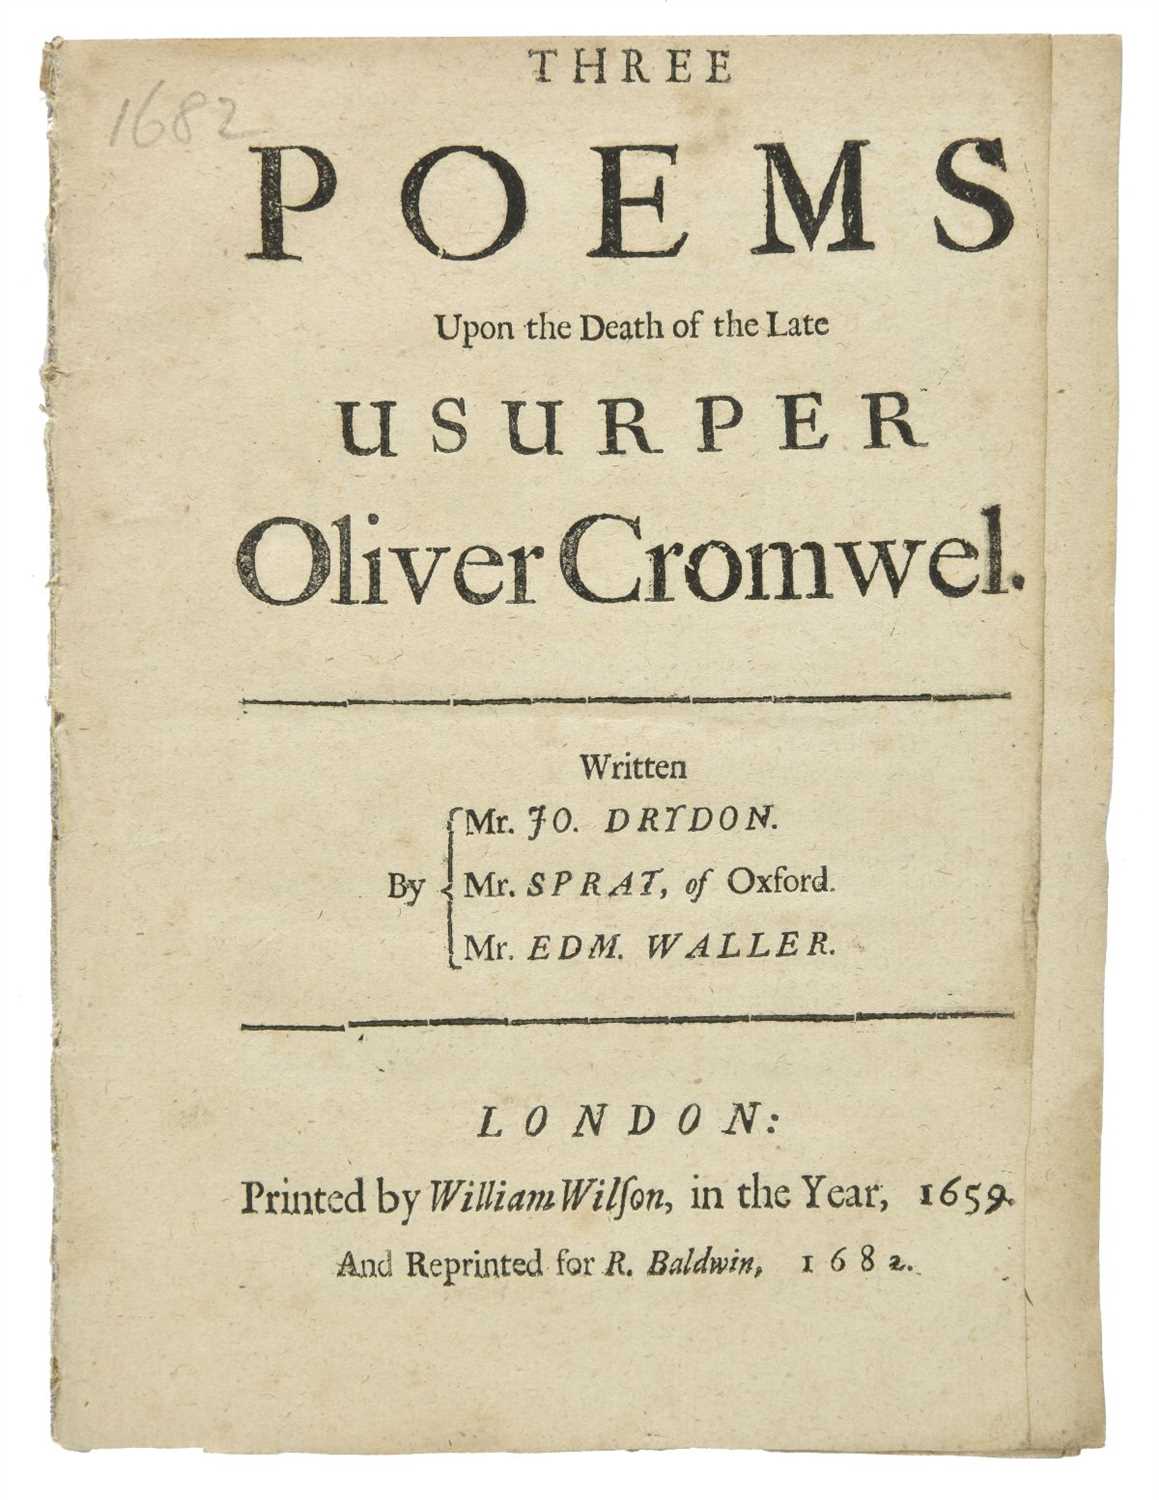 Lot 317 - Dryden (John). Three Poems Upon the Death of the Late Usurper Oliver Cromwel, 1682